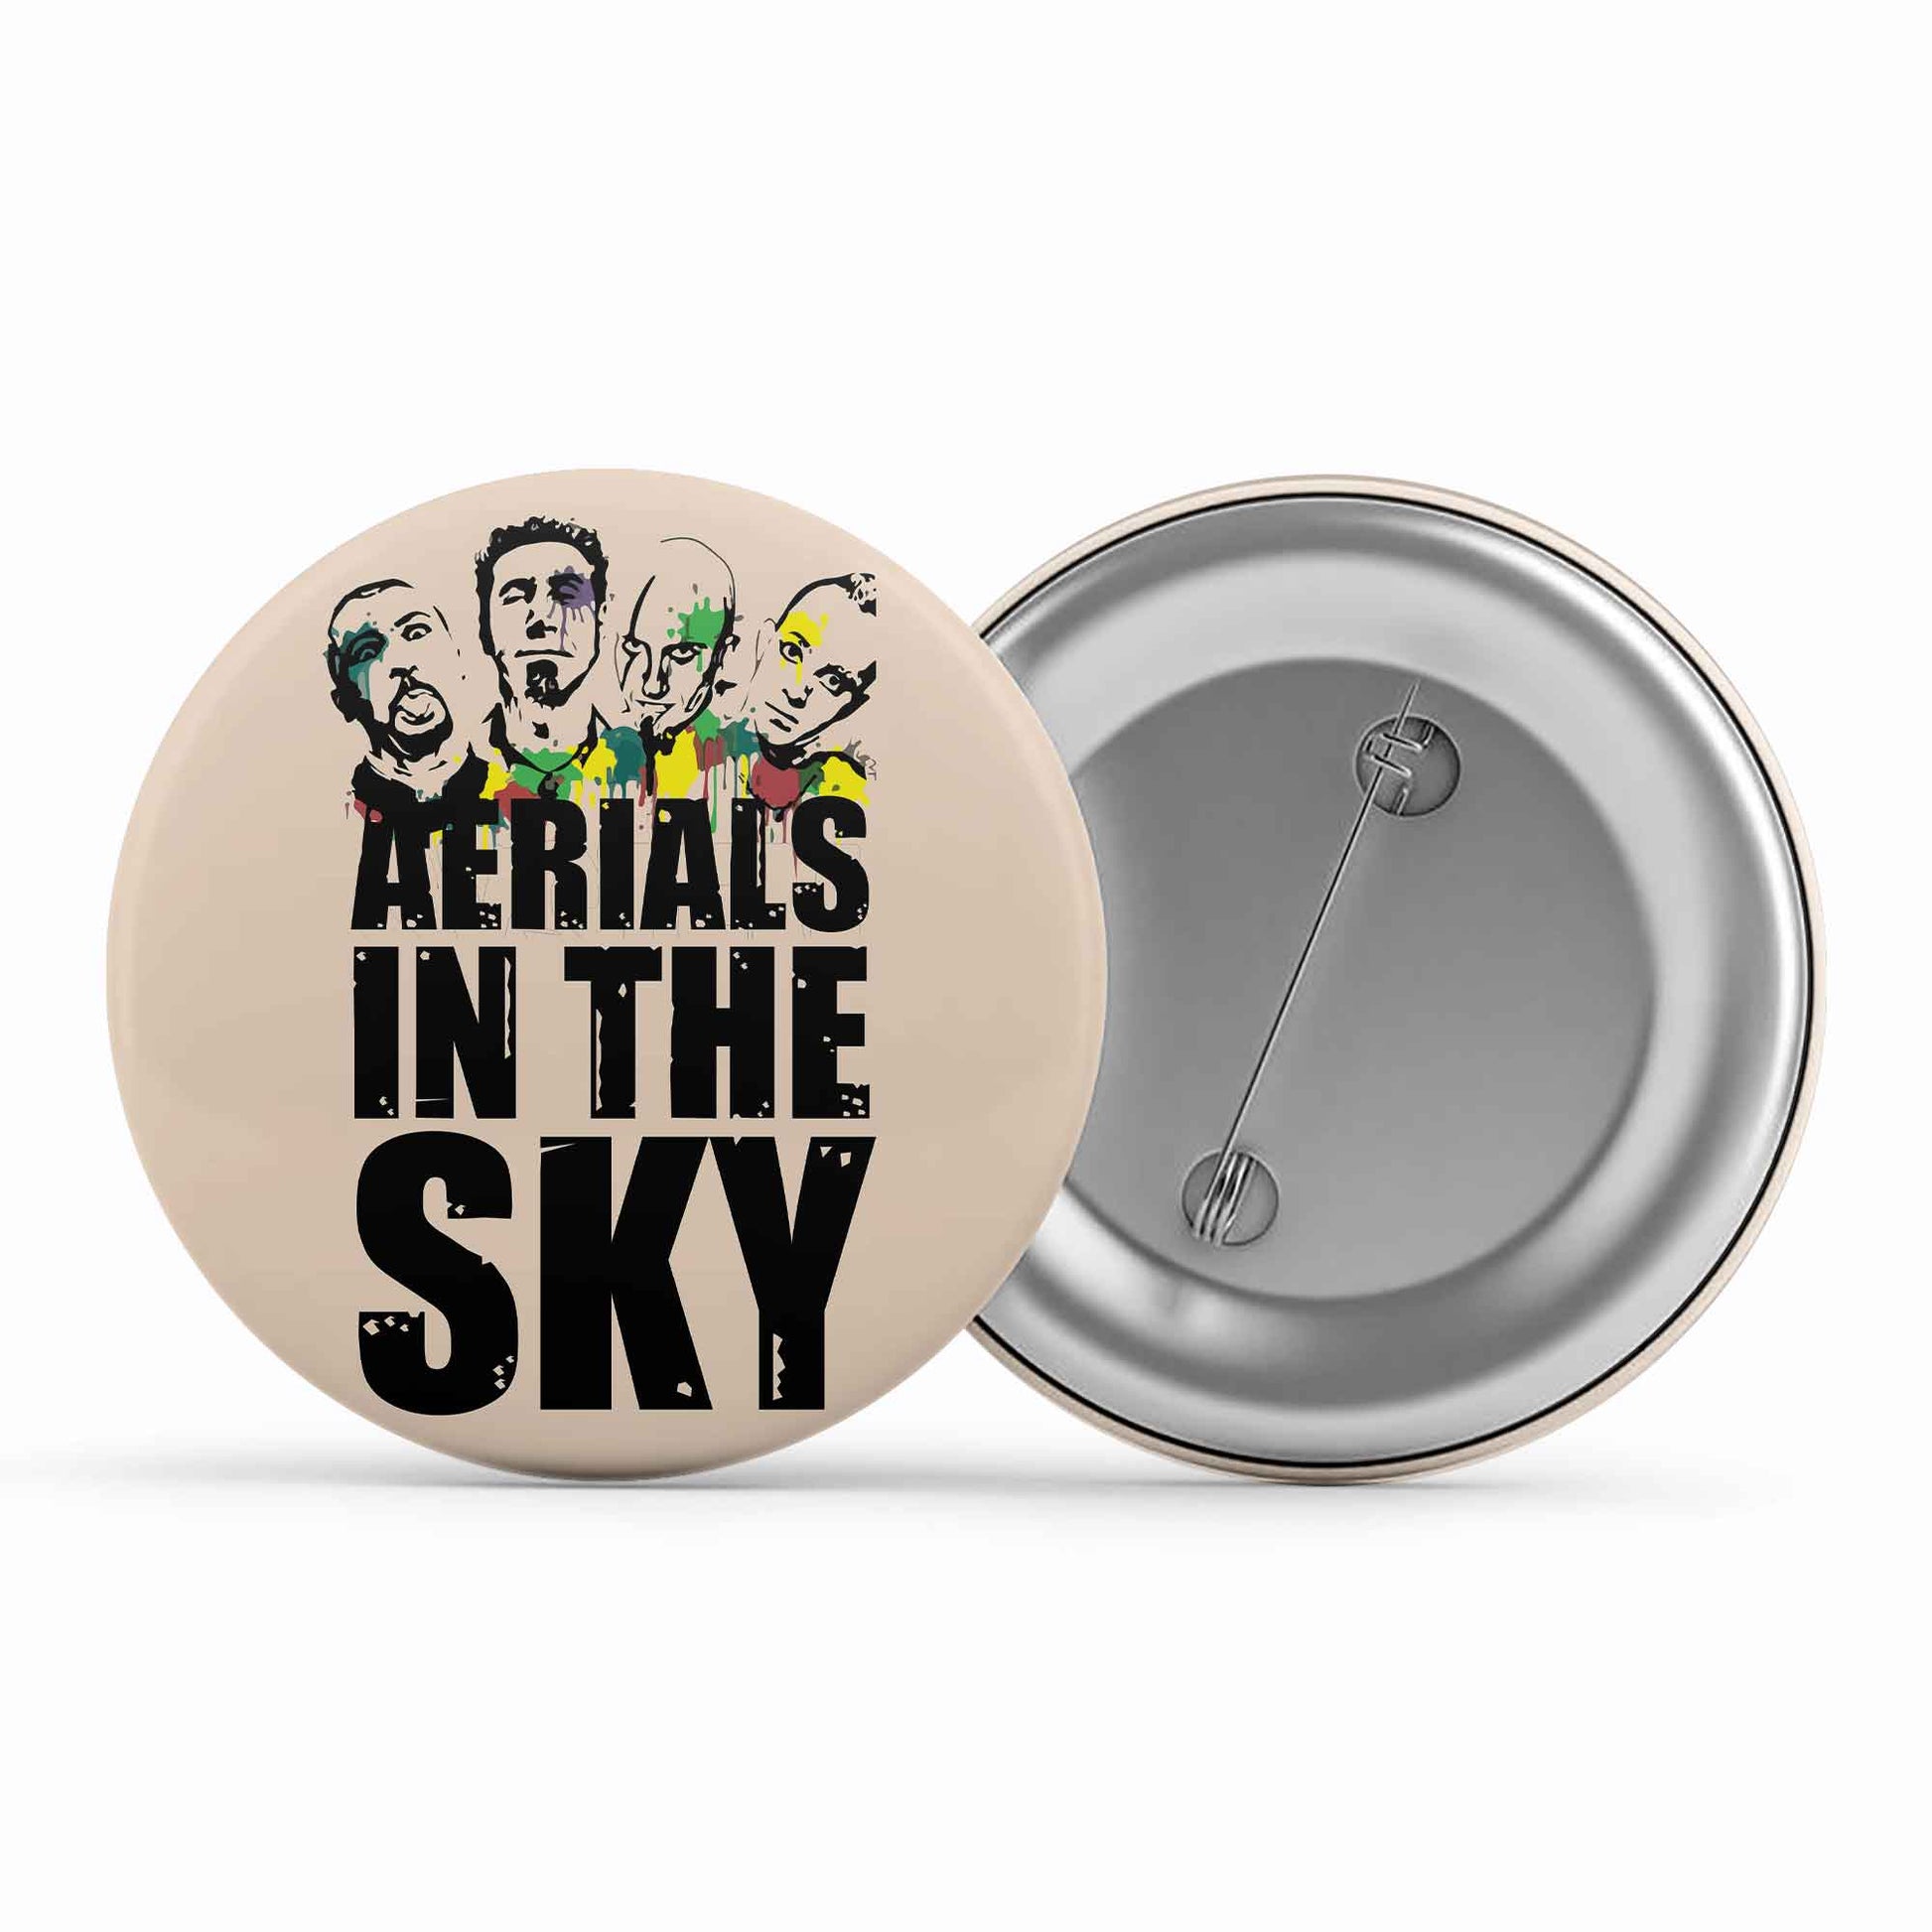 system of a down aerials in the sky badge pin button music band buy online united states of america usa the banyan tee tbt men women girls boys unisex